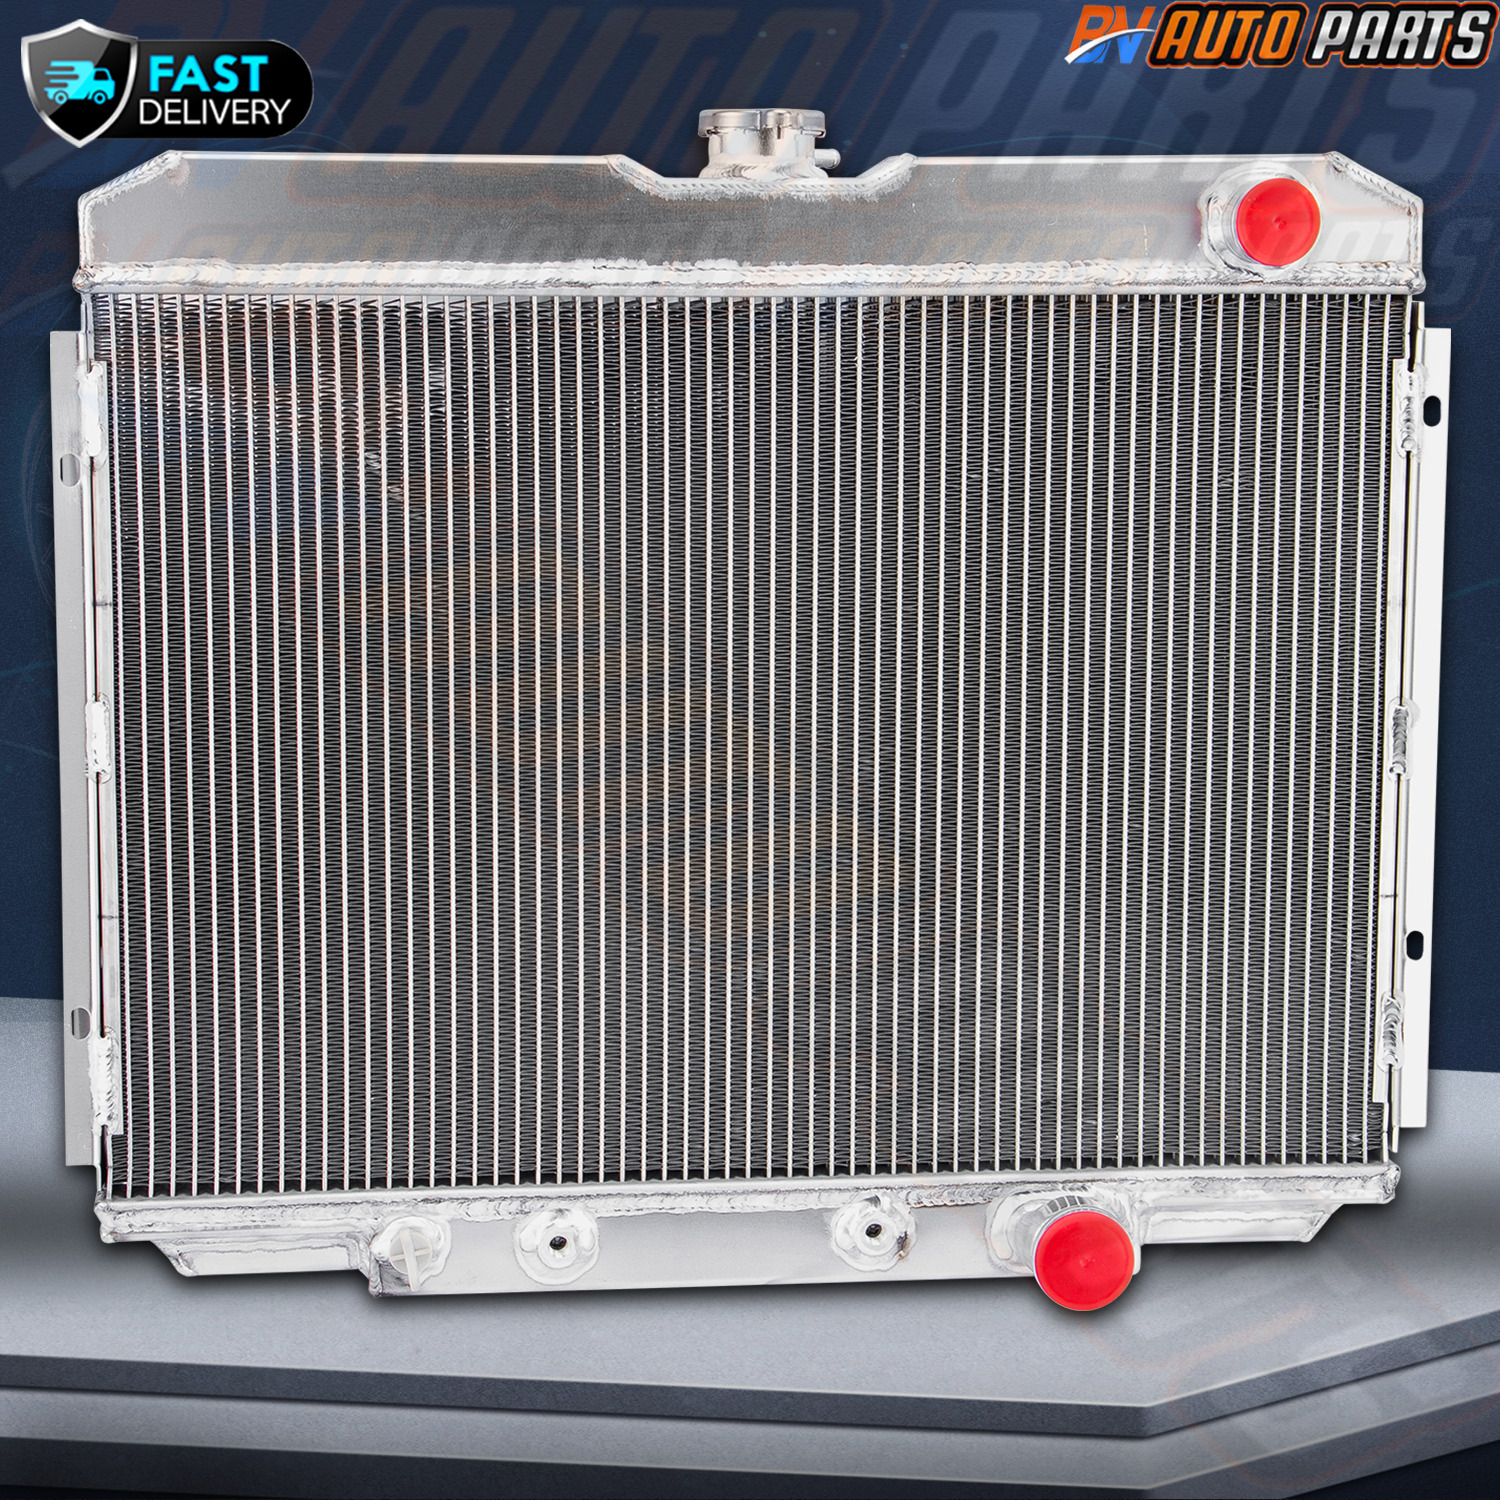 3 Rows Aluminum Radiator For 1967-1970 Ford Mustang/Mercury Cougar All Engine